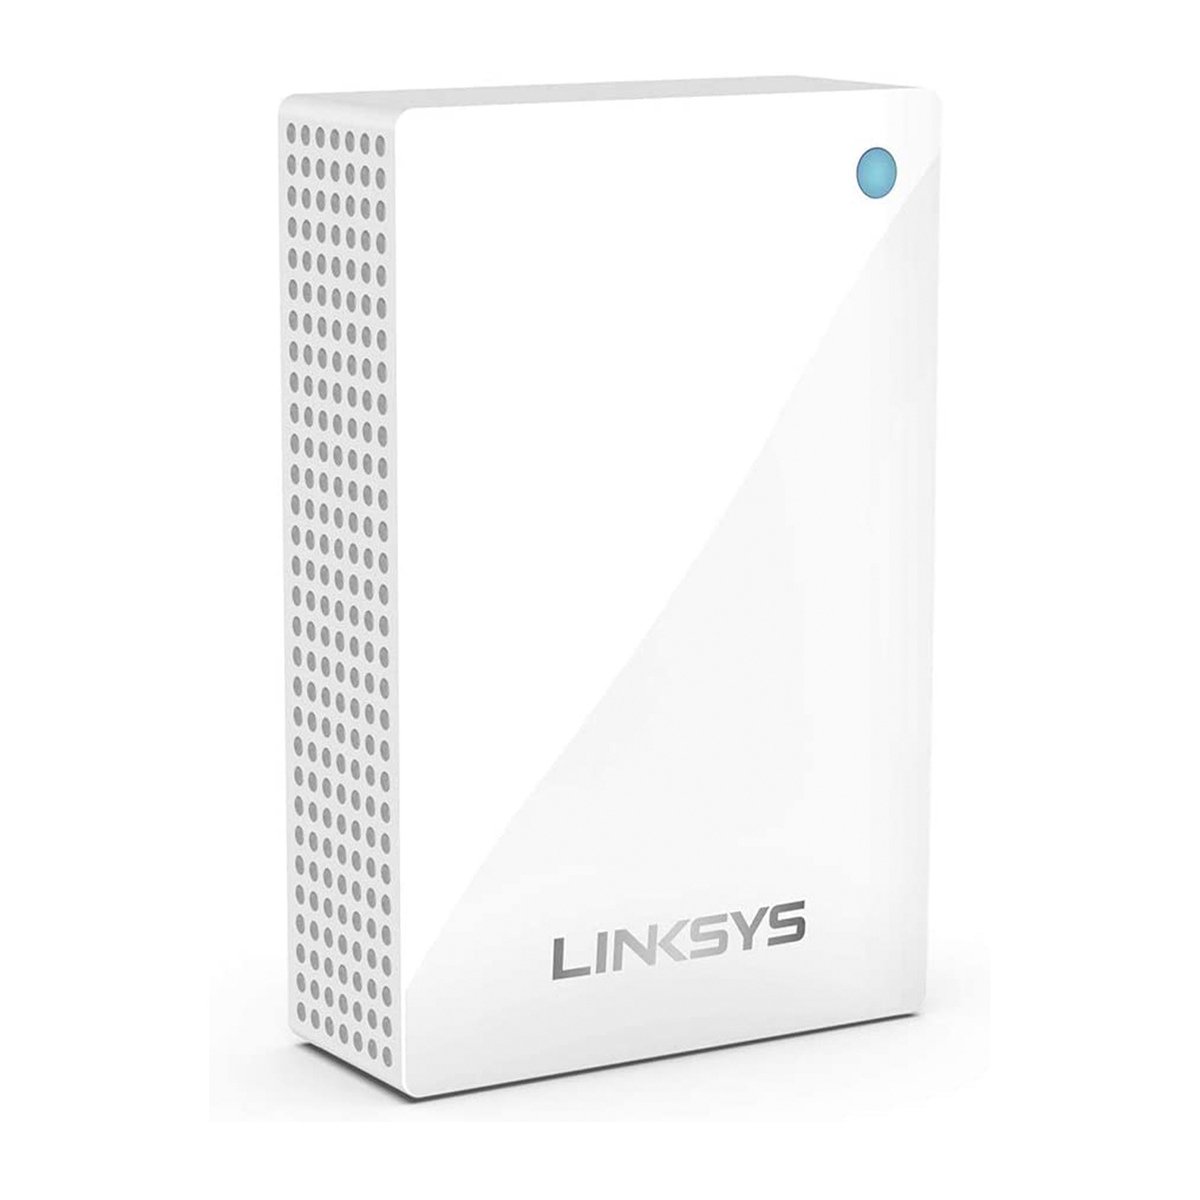 Linksys MR8300 Tri-Band Mesh WiFi Router & Velop Plug-In Node